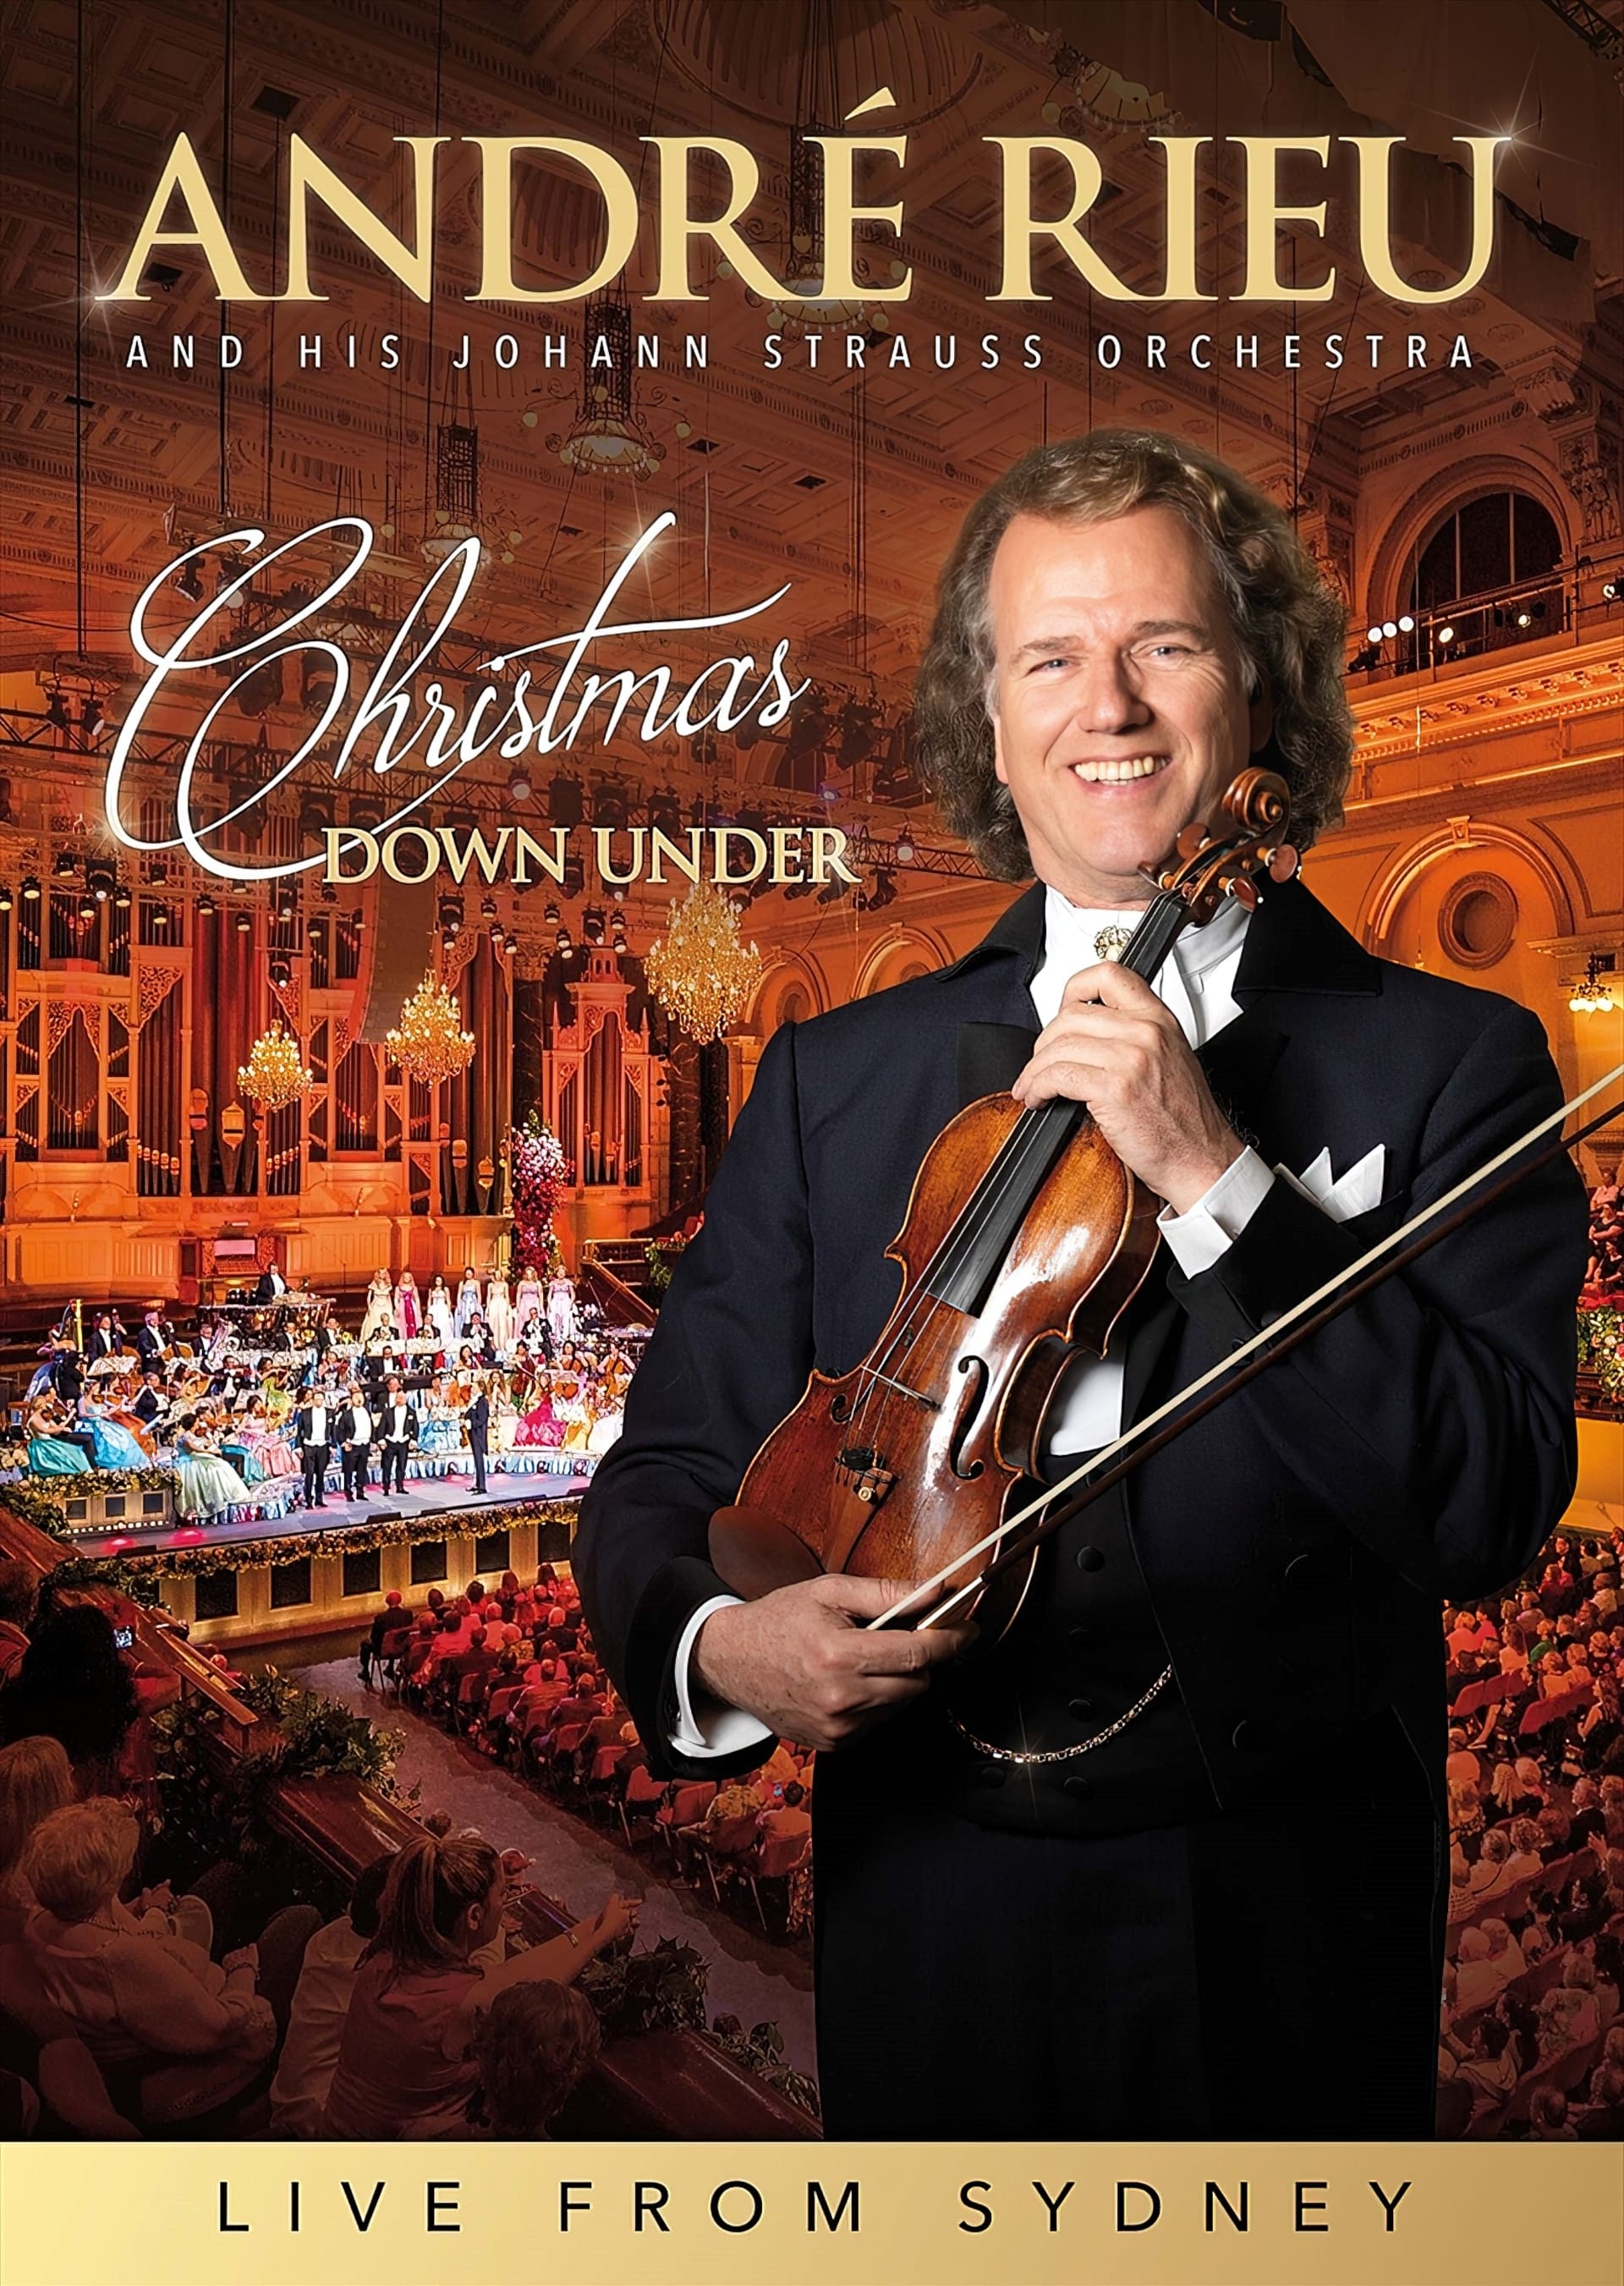 André Rieu - Christmas Down Under - Live from Sydney